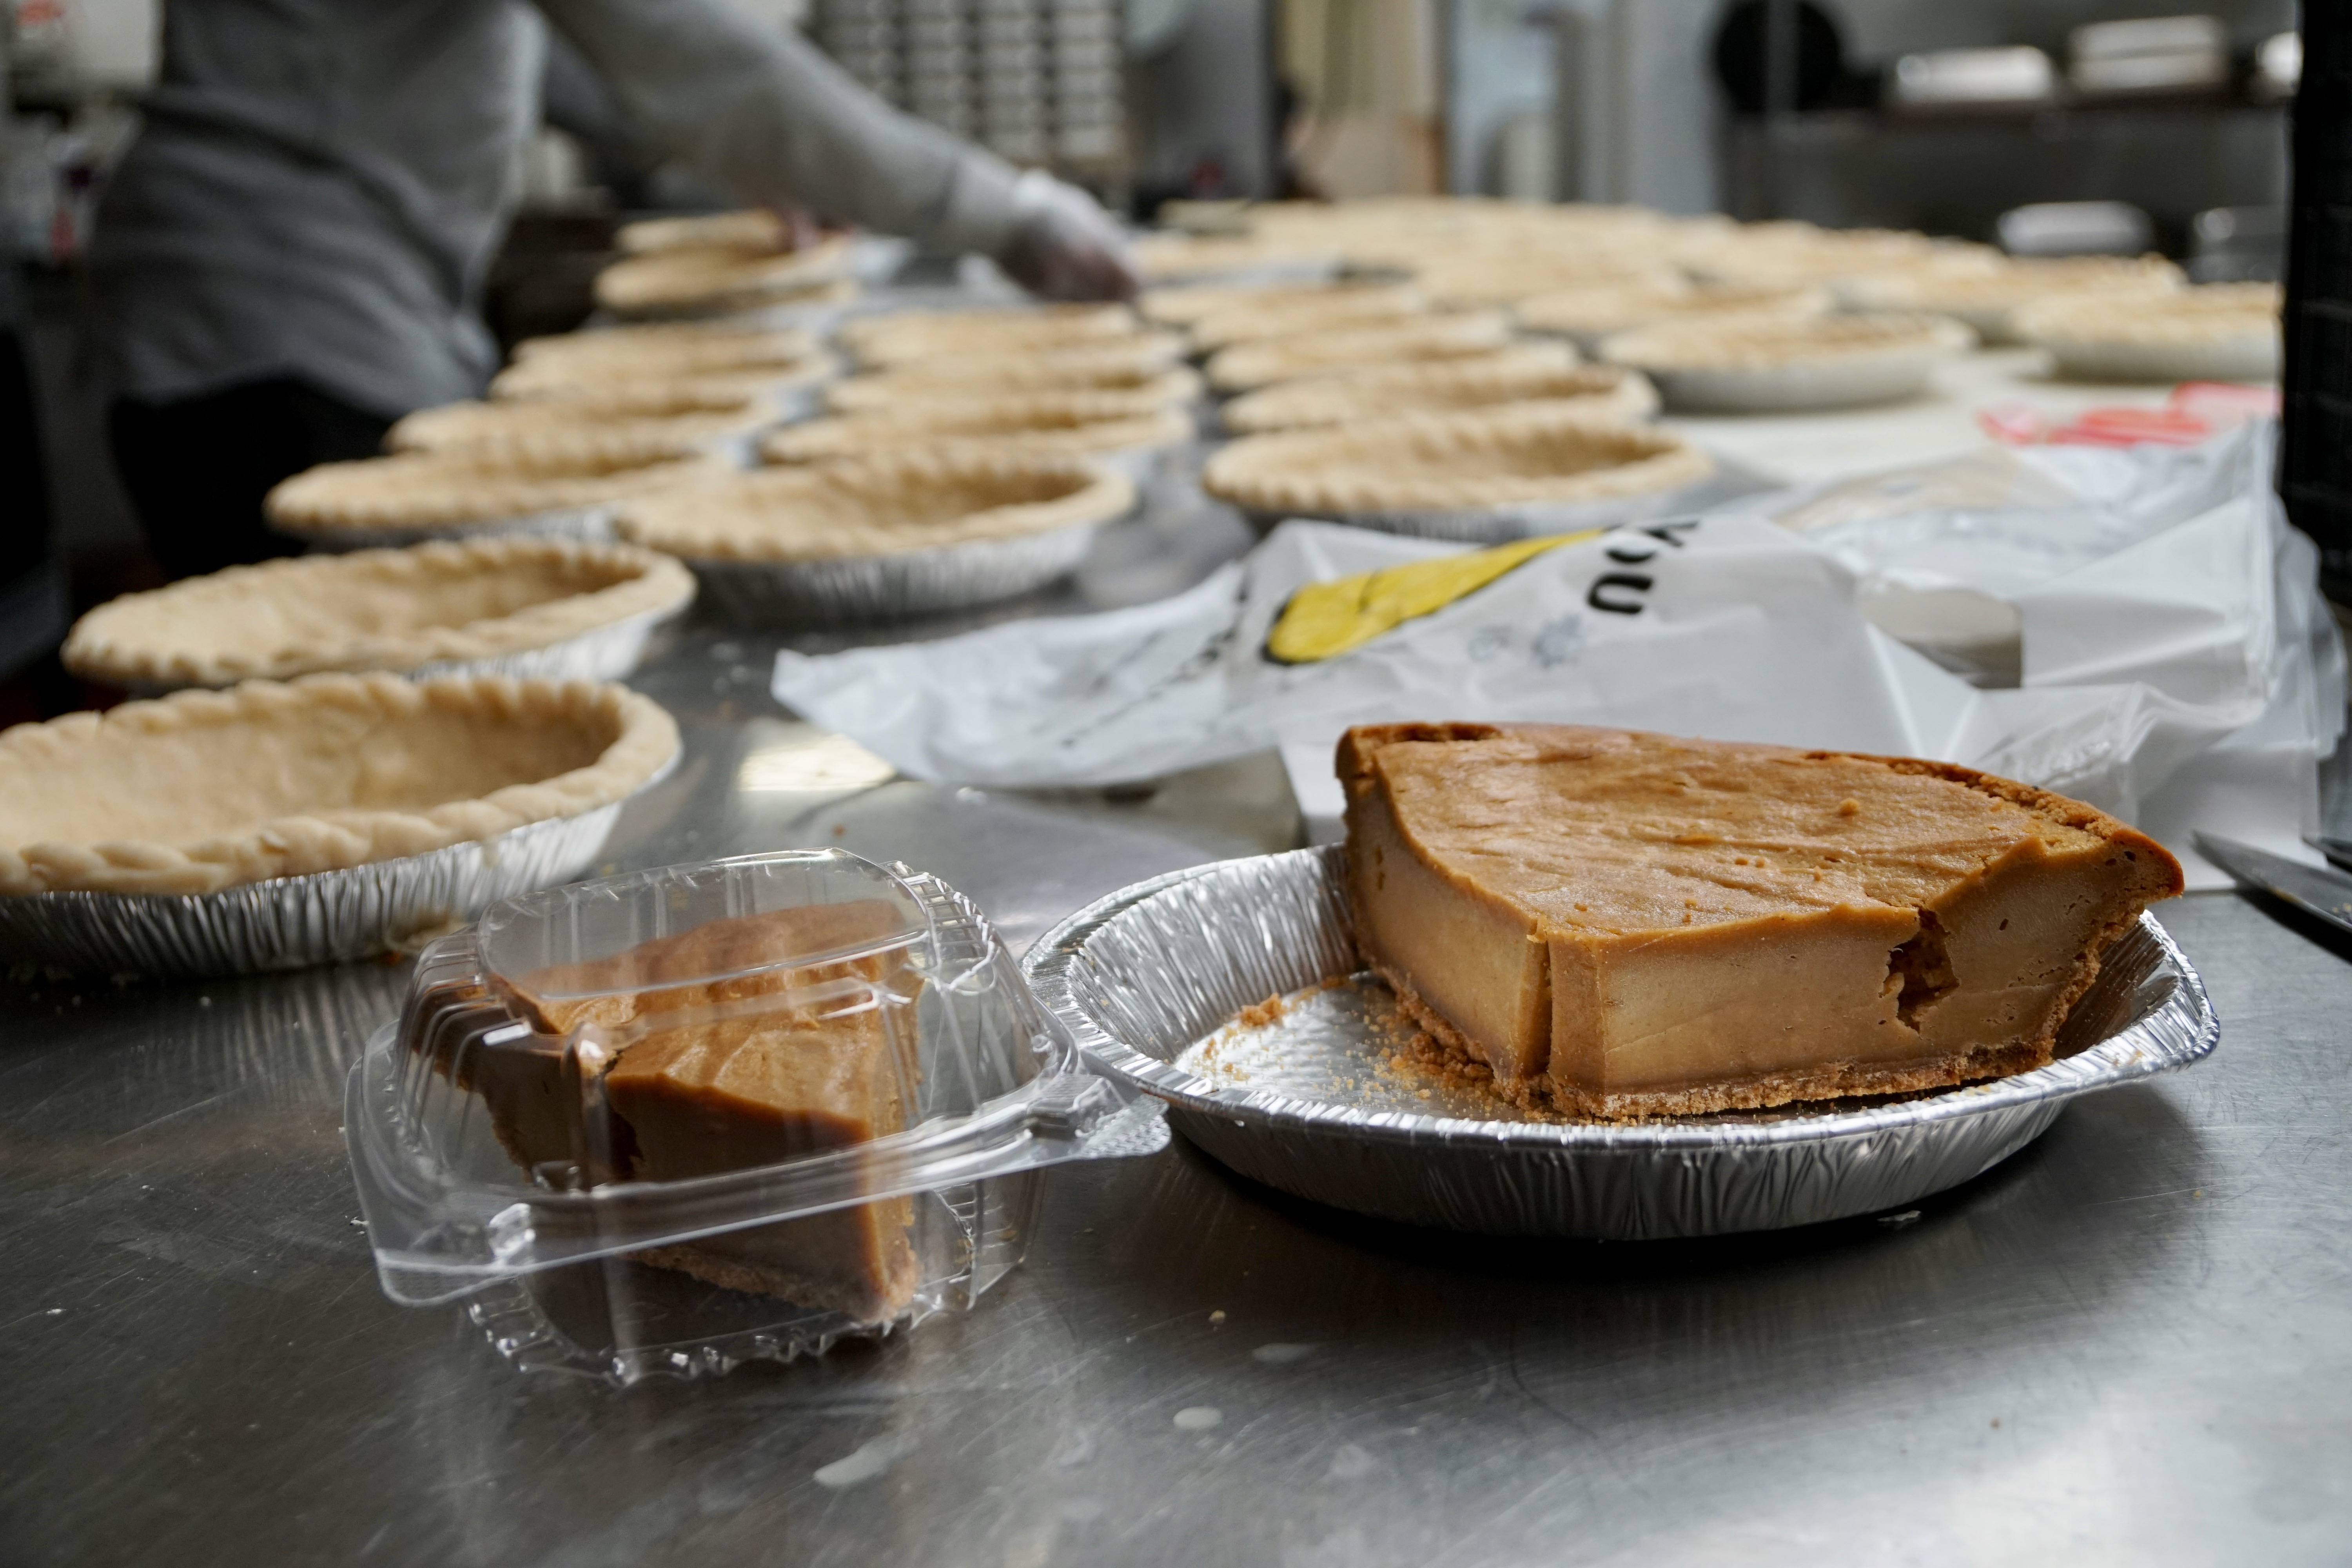 While the bakery normally doesn't take requests, they bent their rule to experiment with a peanut butter pie. The results were so successful, it may soon join the lineup. Photo by Adam Carr/NNS.